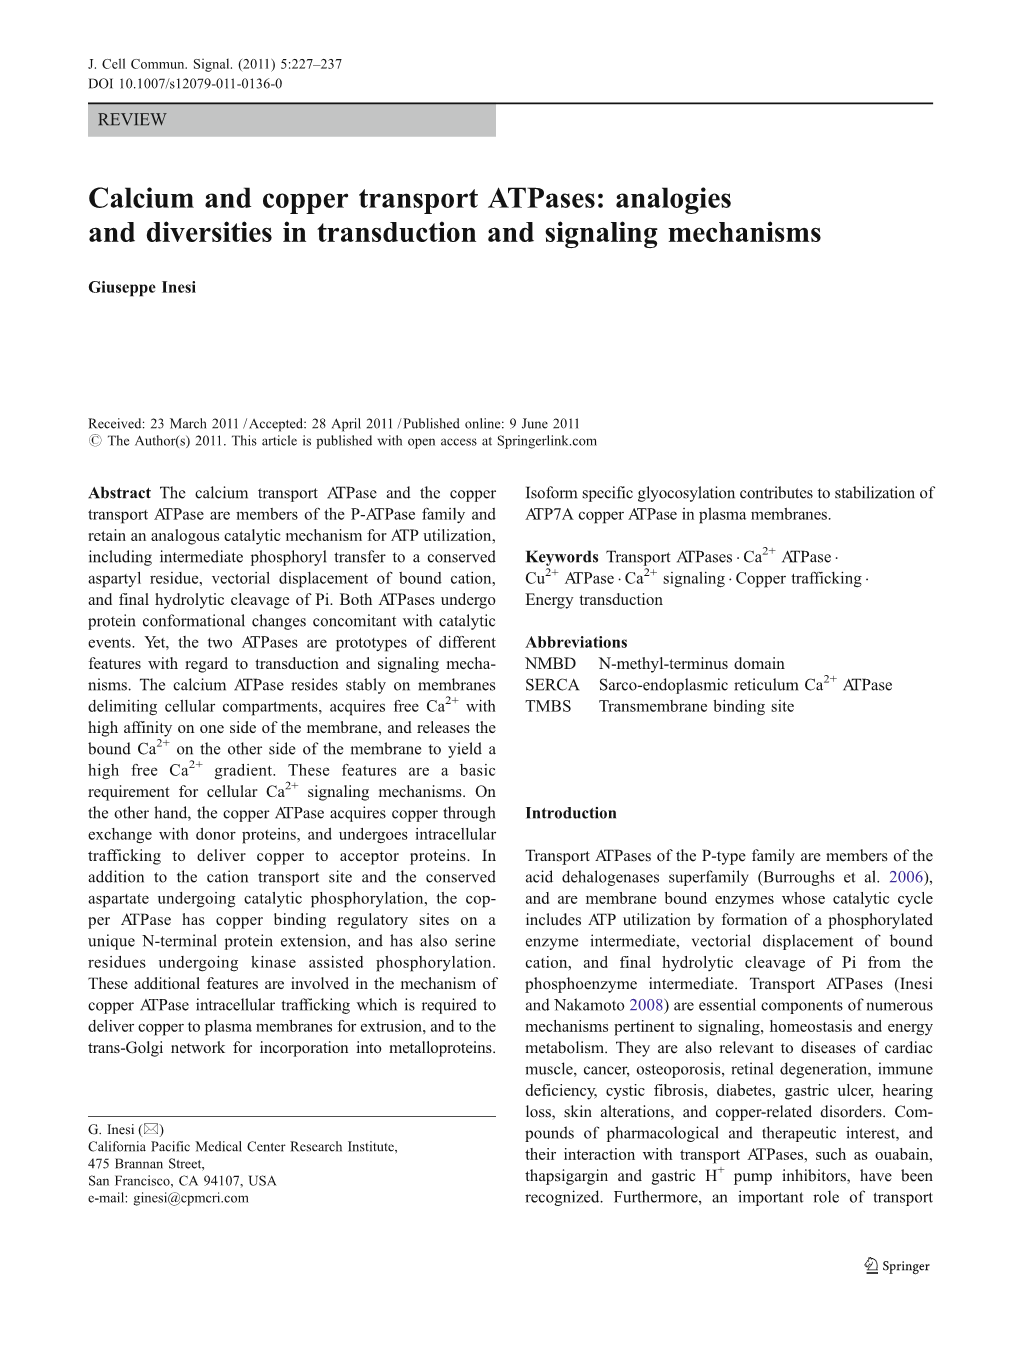 Calcium and Copper Transport Atpases: Analogies and Diversities in Transduction and Signaling Mechanisms